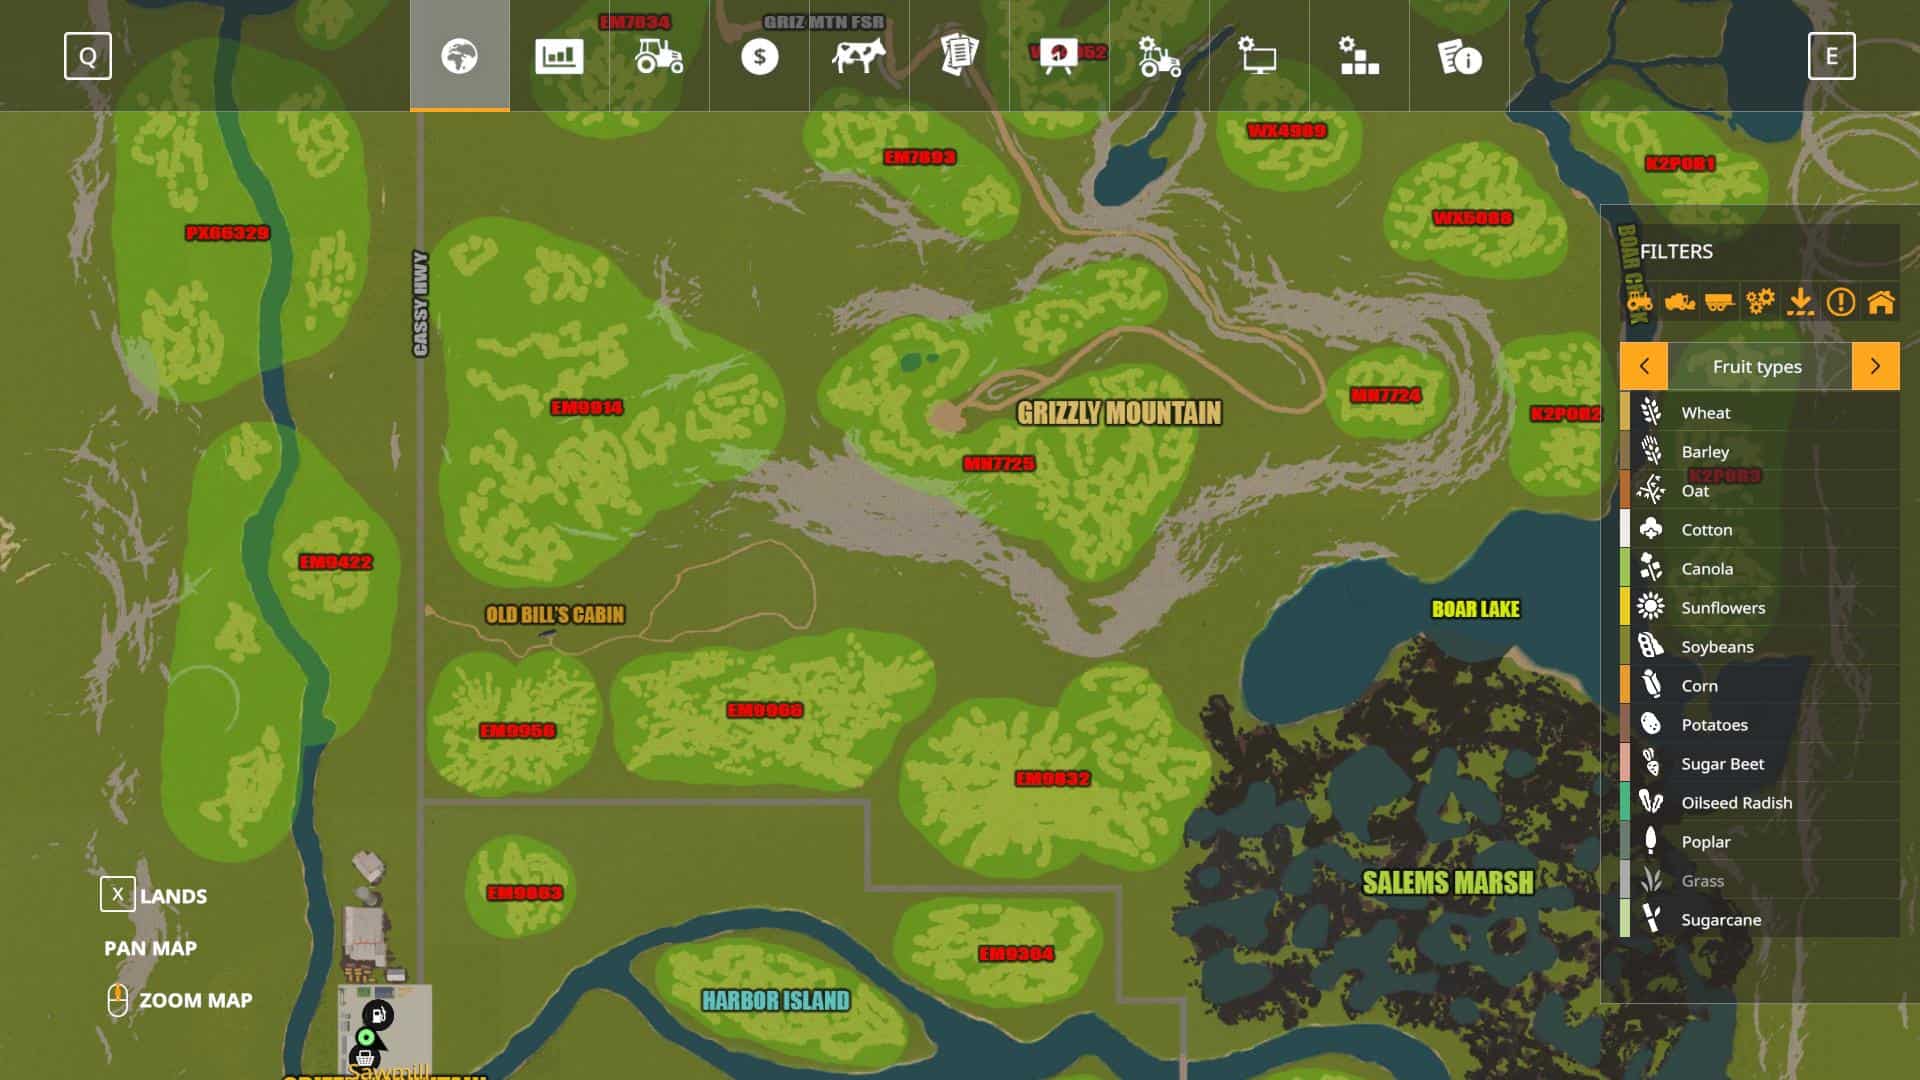 Grizzly Mountain Logging v1.0.0 Map Mod Download